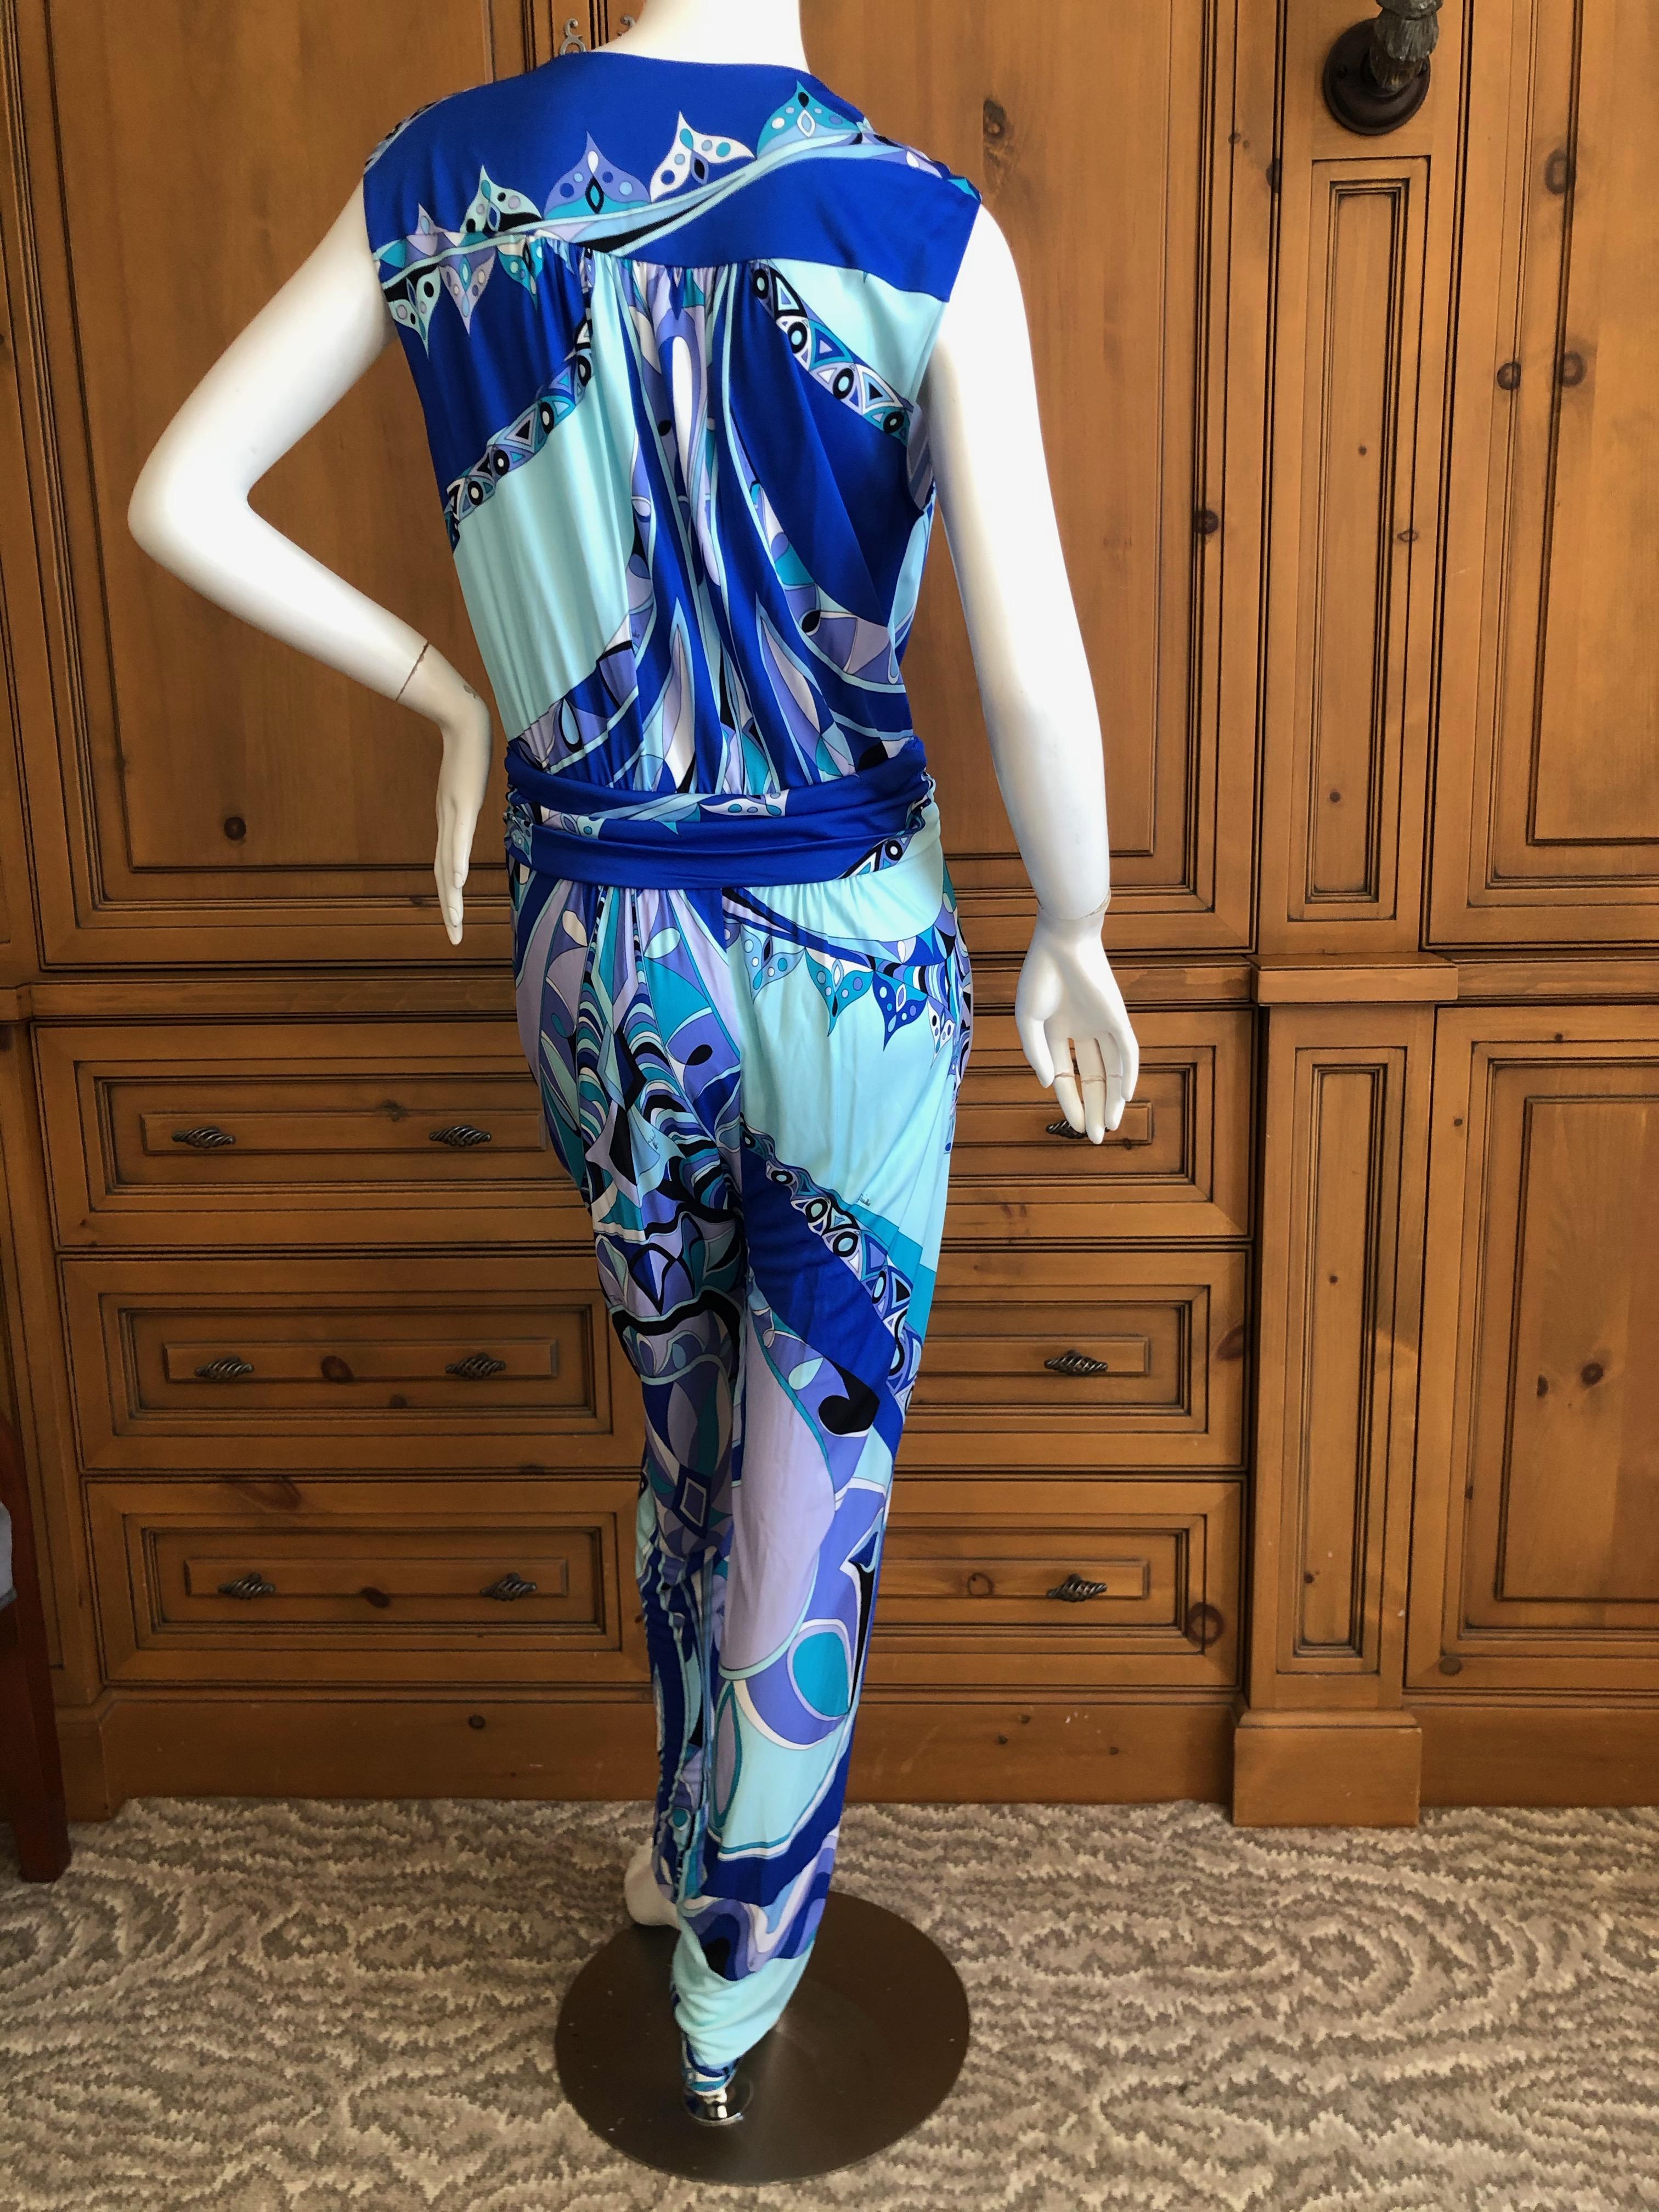 Emilio Pucci Colorful Low Cut Jumpsuit In Excellent Condition For Sale In Cloverdale, CA